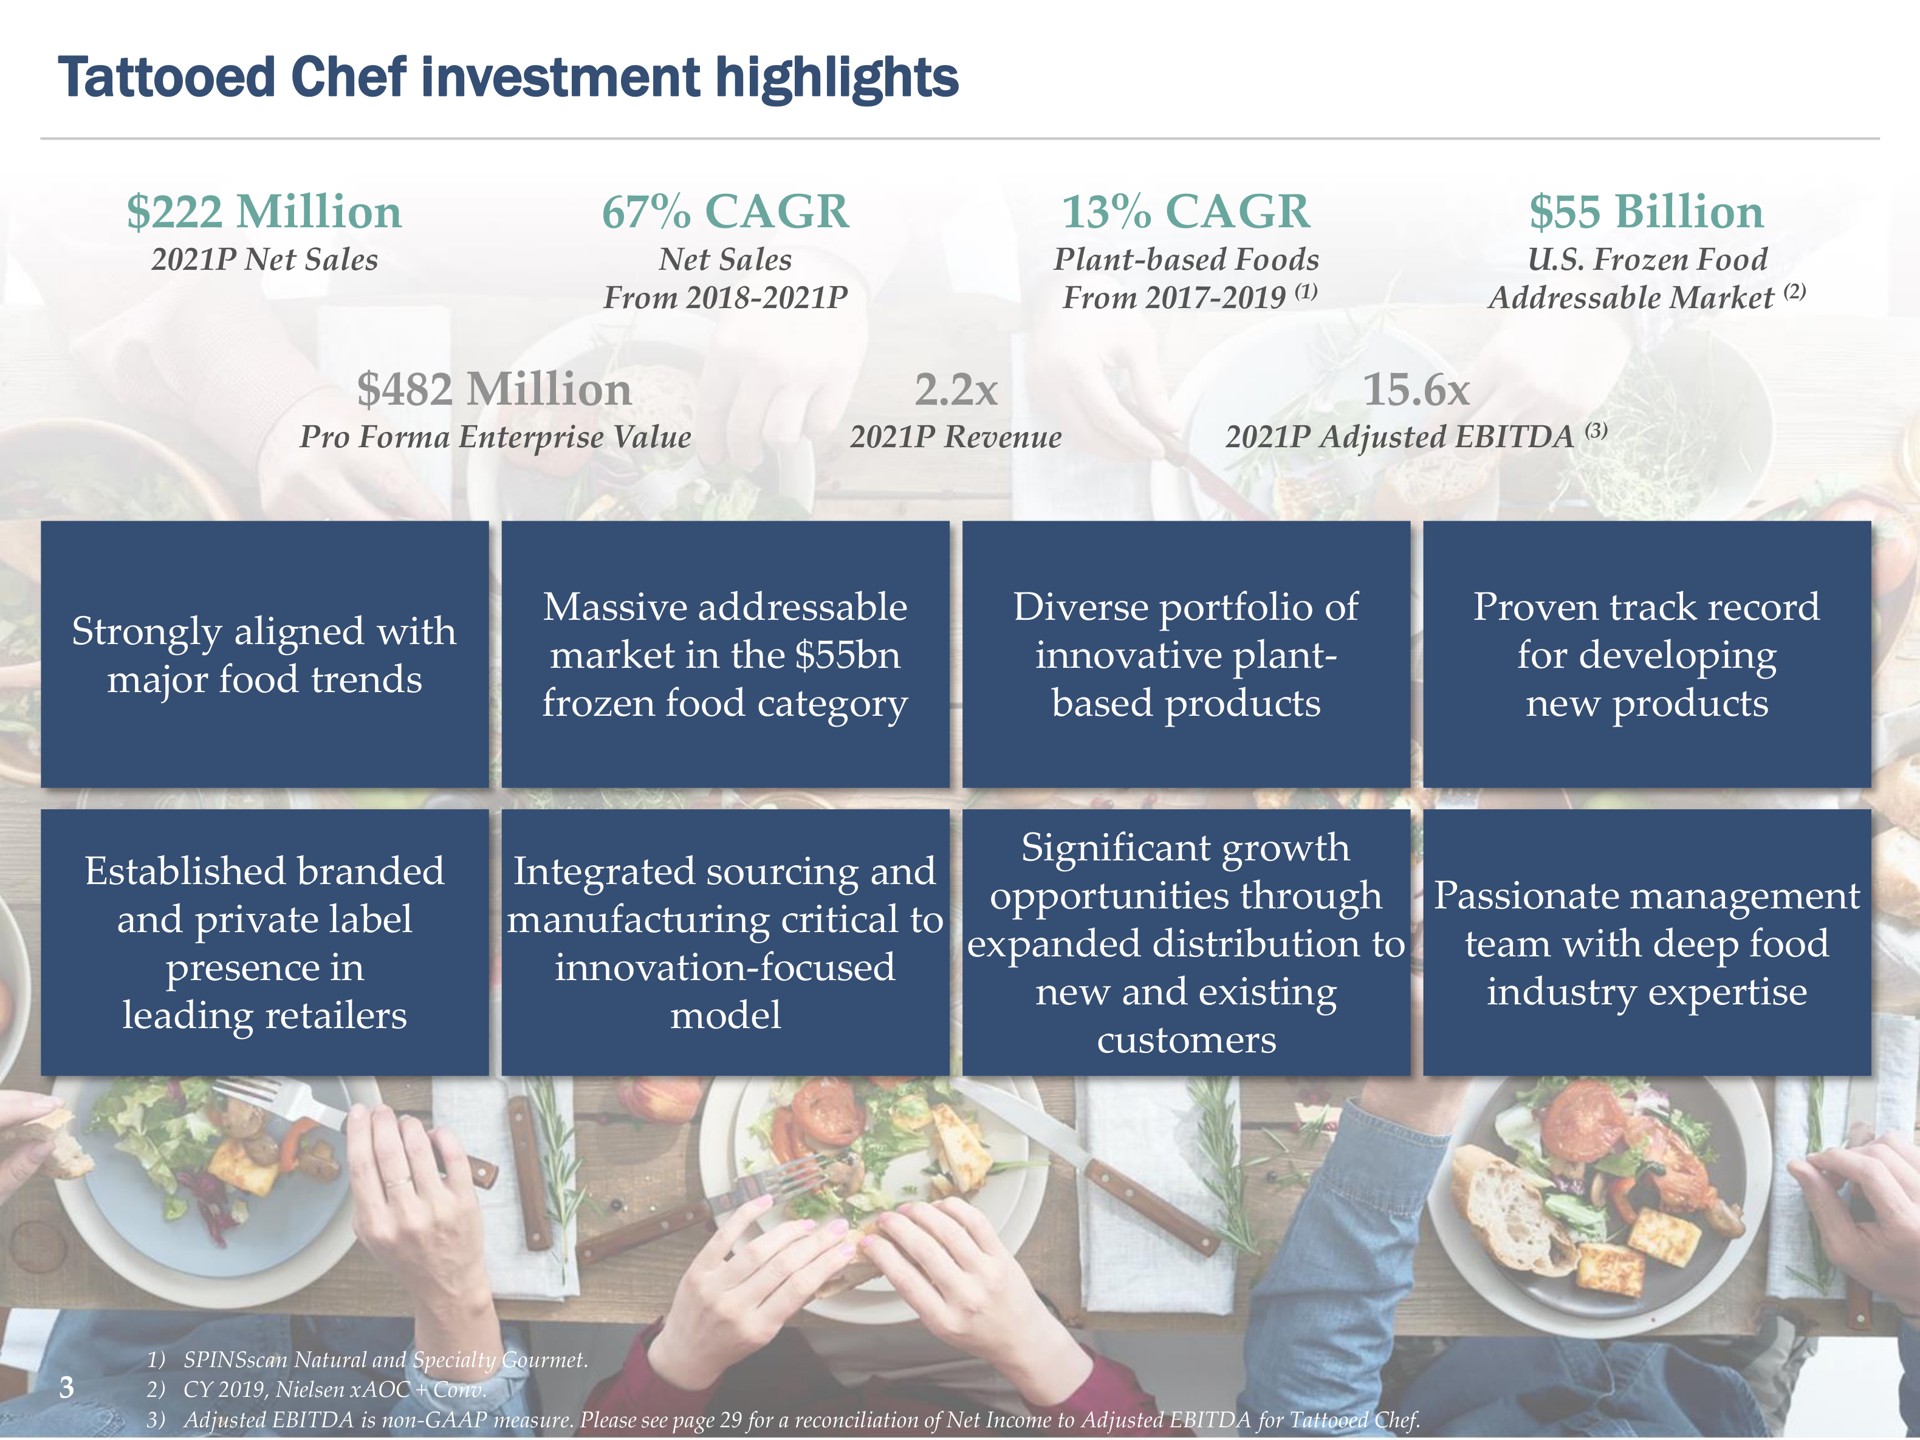 tattooed chef investment highlights million billion million established branded leading retailers integrated sourcing and customers | Tattooed Chef